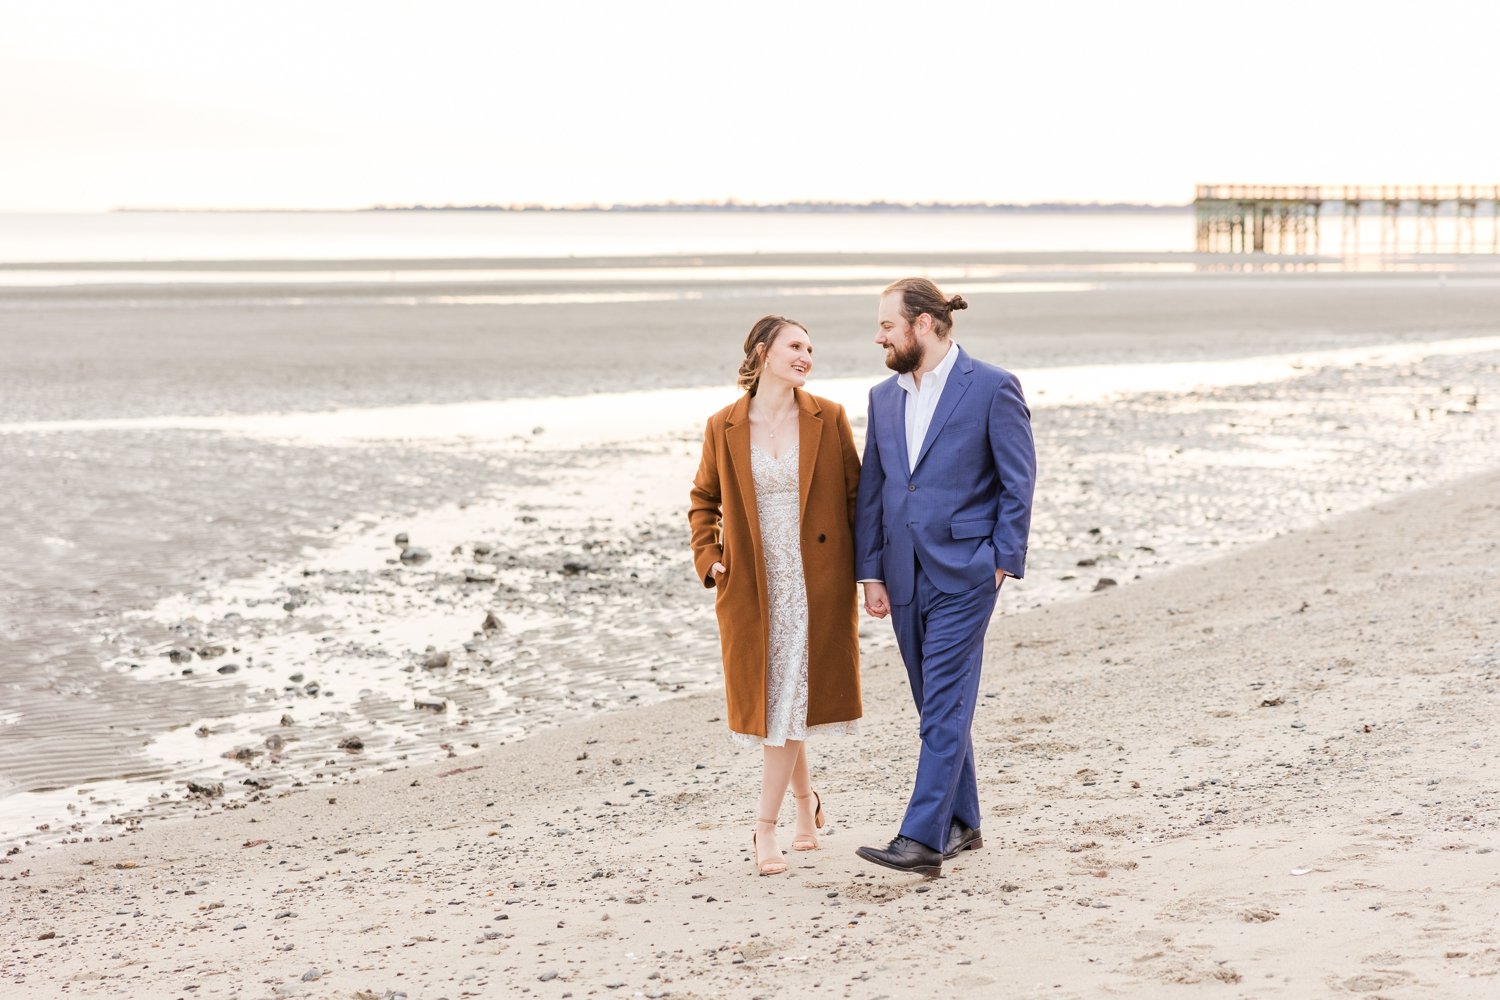 winter-engagement-session-walnut-beach-milford-ct-photographer-shaina-lee-photography